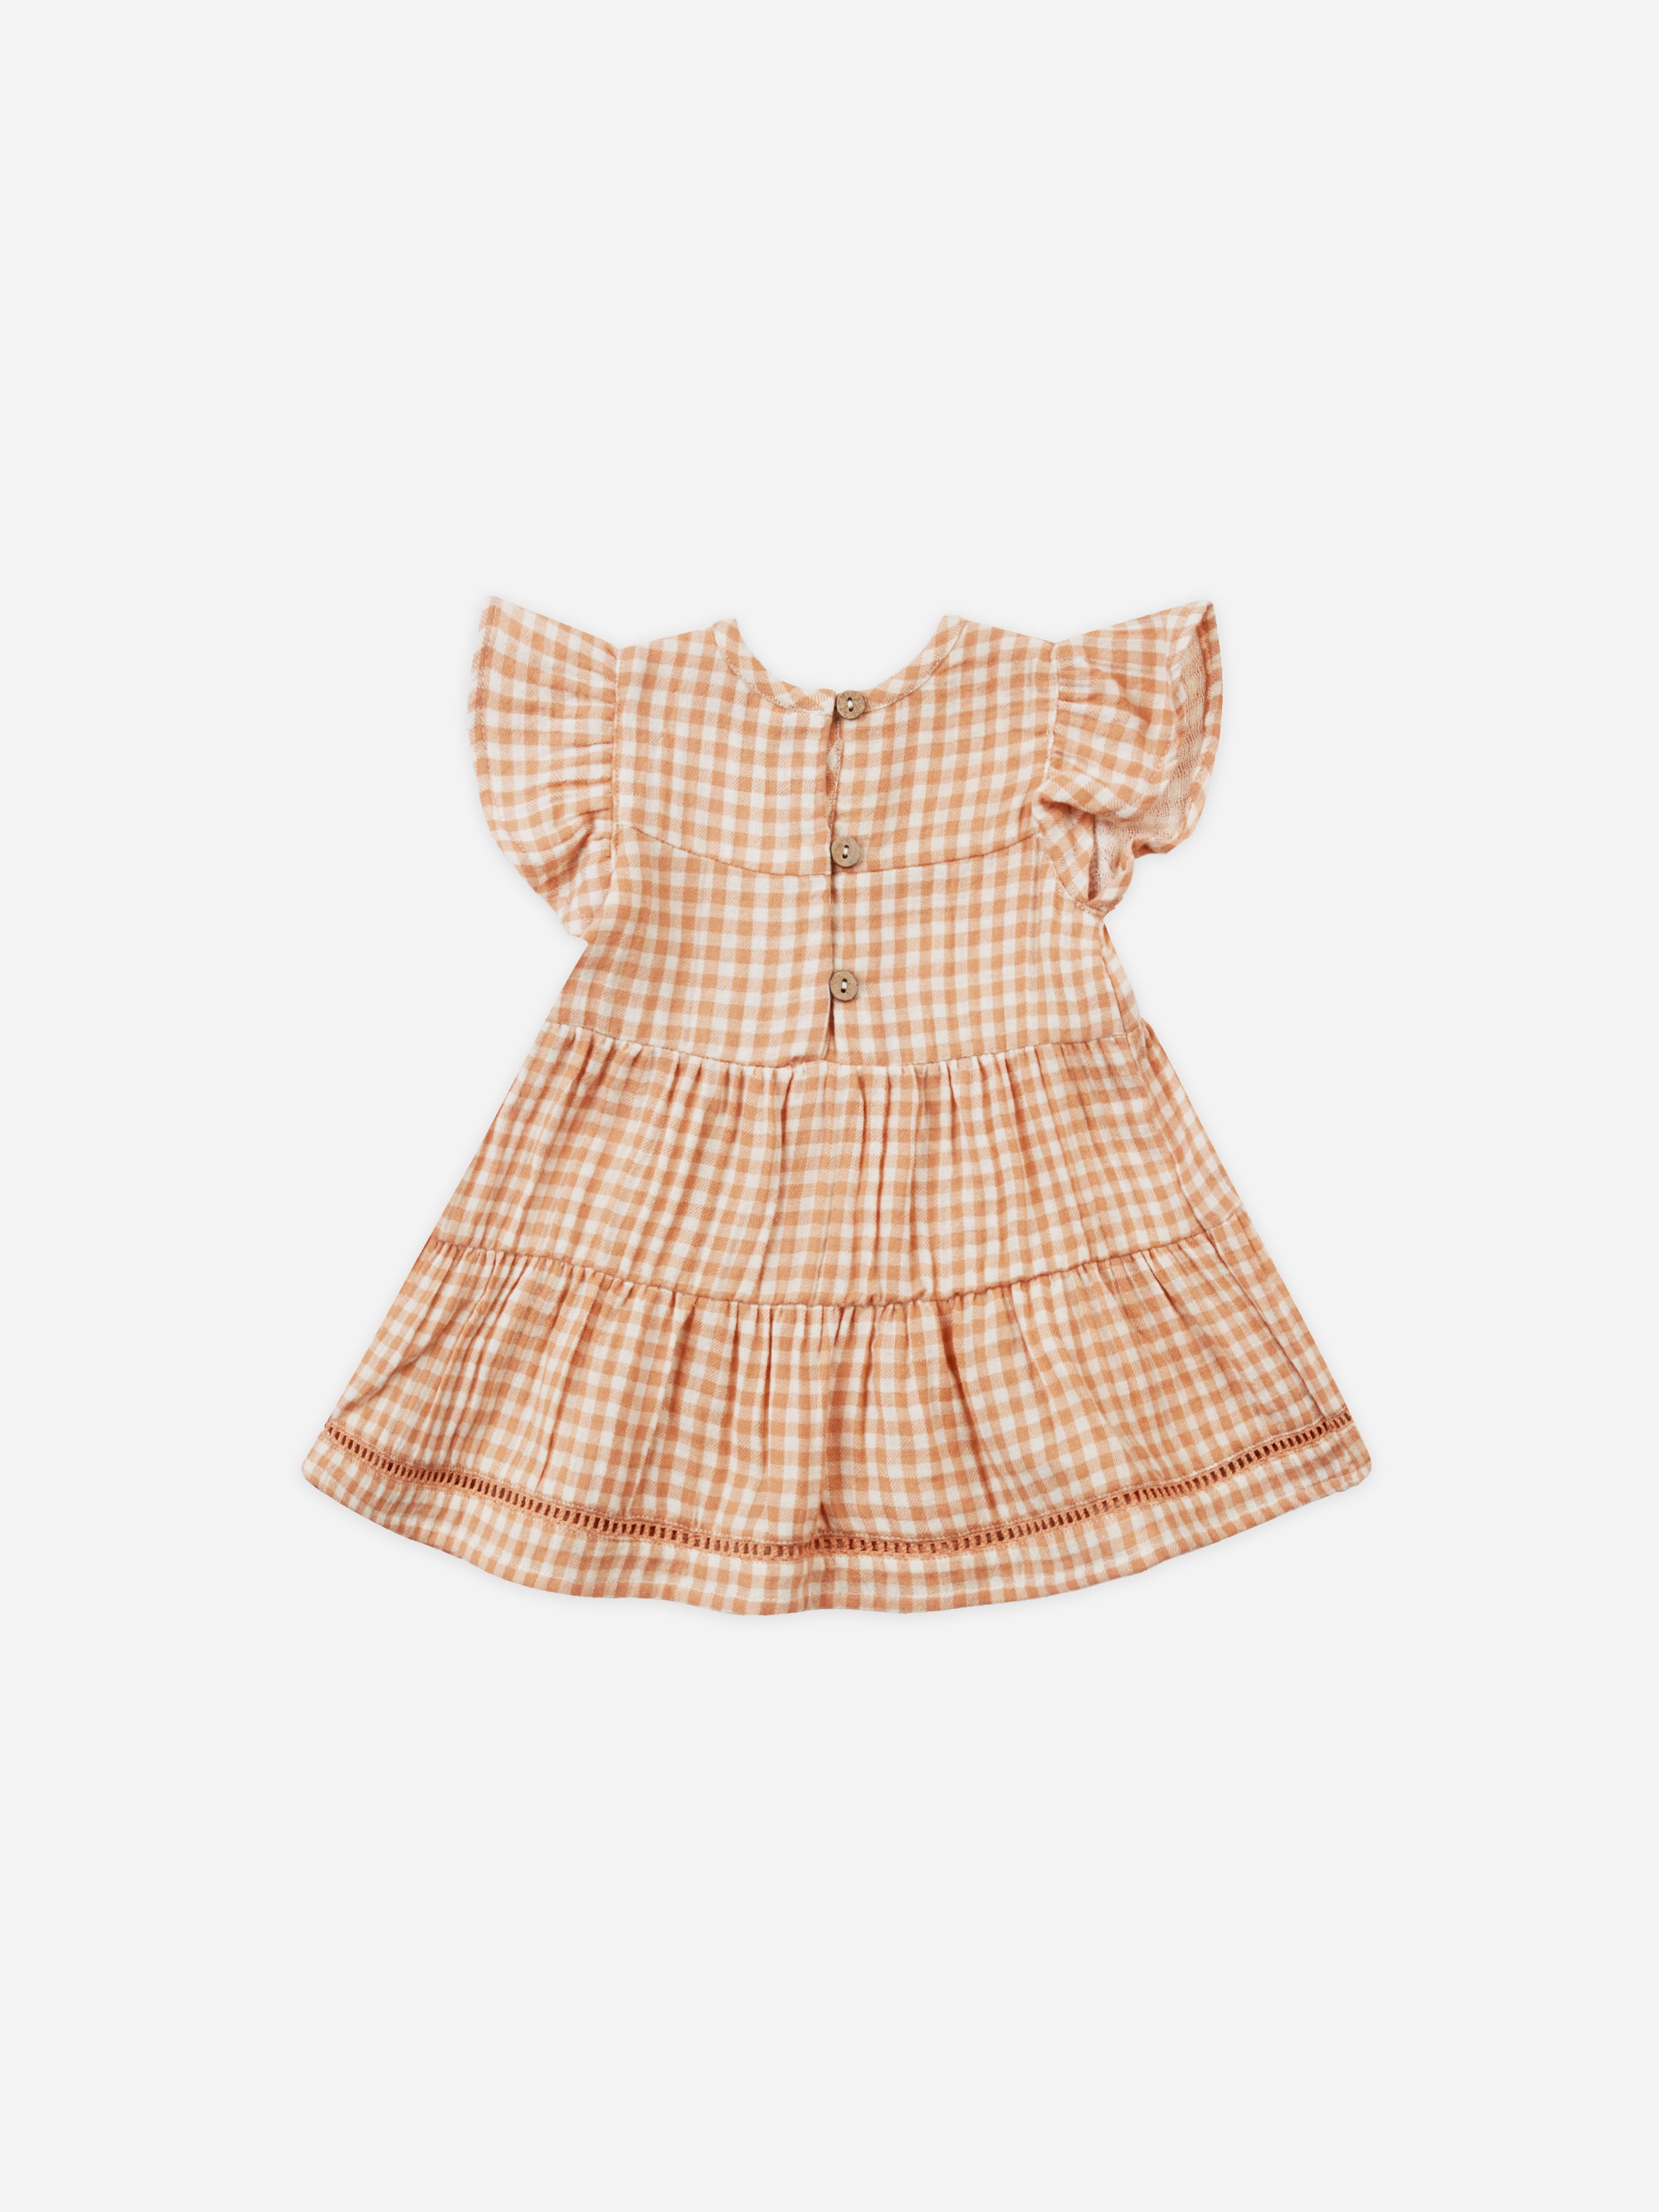 Lily Dress || Melon Gingham - Rylee + Cru | Kids Clothes | Trendy Baby Clothes | Modern Infant Outfits |